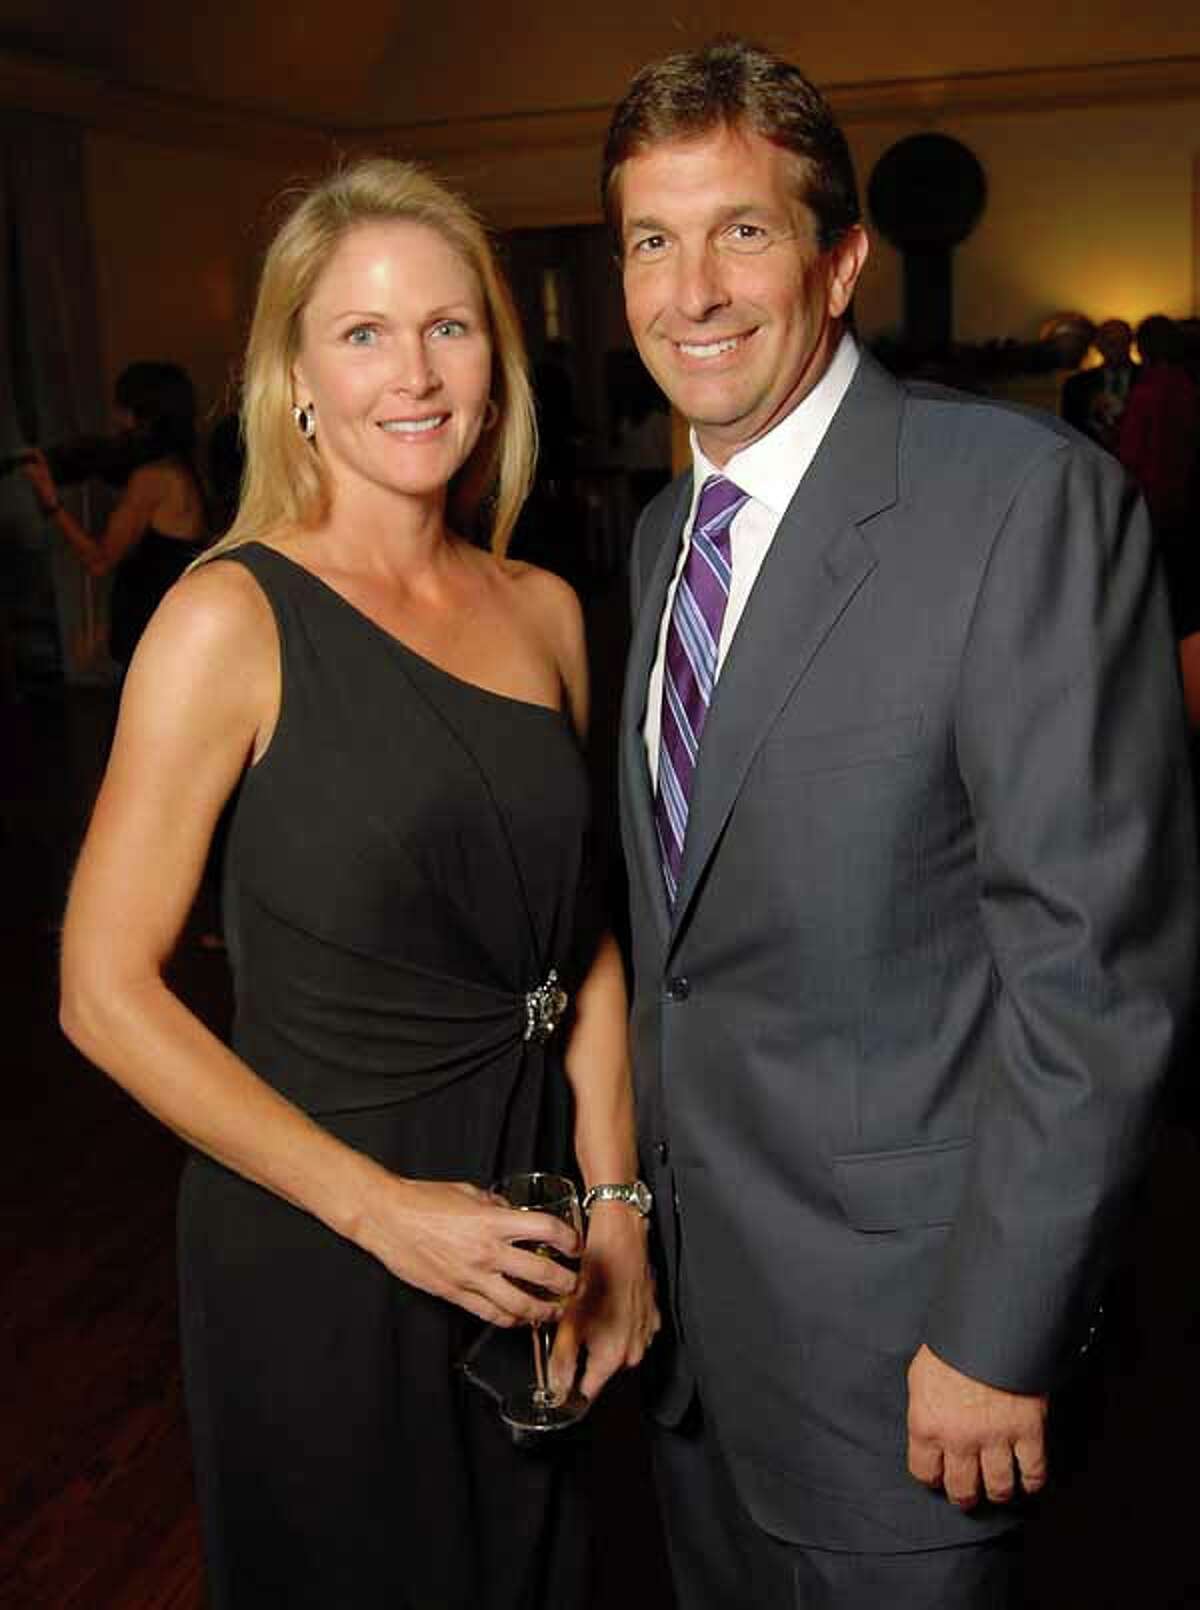 Heather Laruso Hutchins and John Goodman are shown in October 2009 at the Memorial Park Conservancy Gala at The Bayou Club.